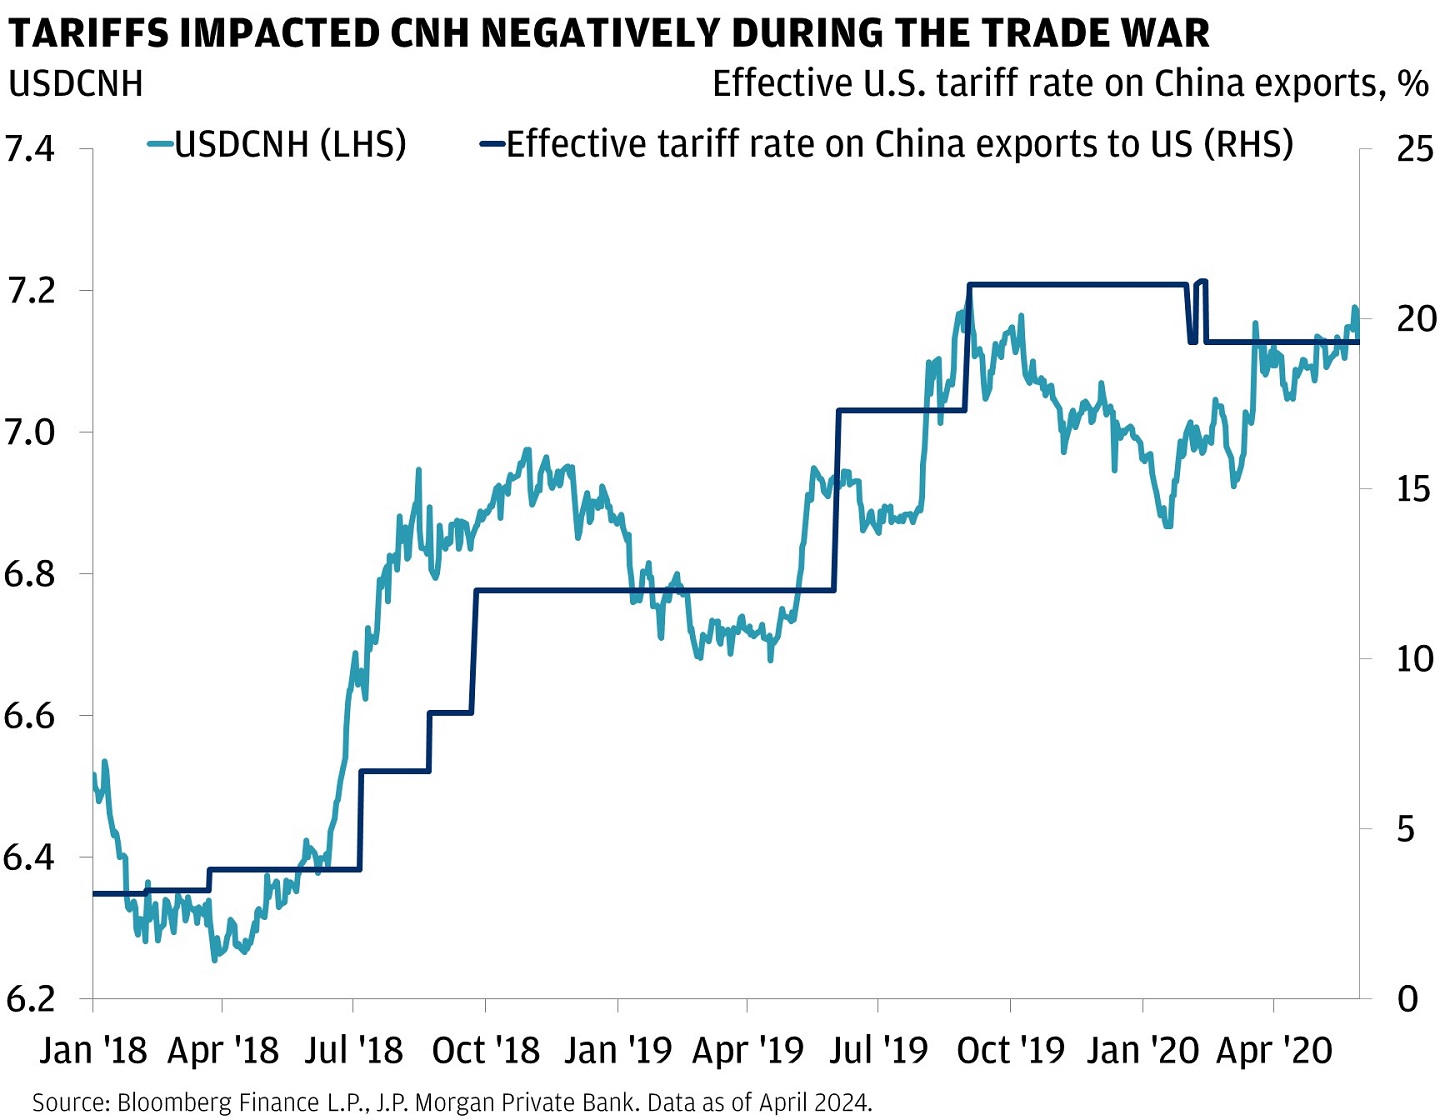 This line graph plots the effective tariff rate on China exports to U.S. on the right axis and USDCNH on the left axis from January 2018 to May 2020.